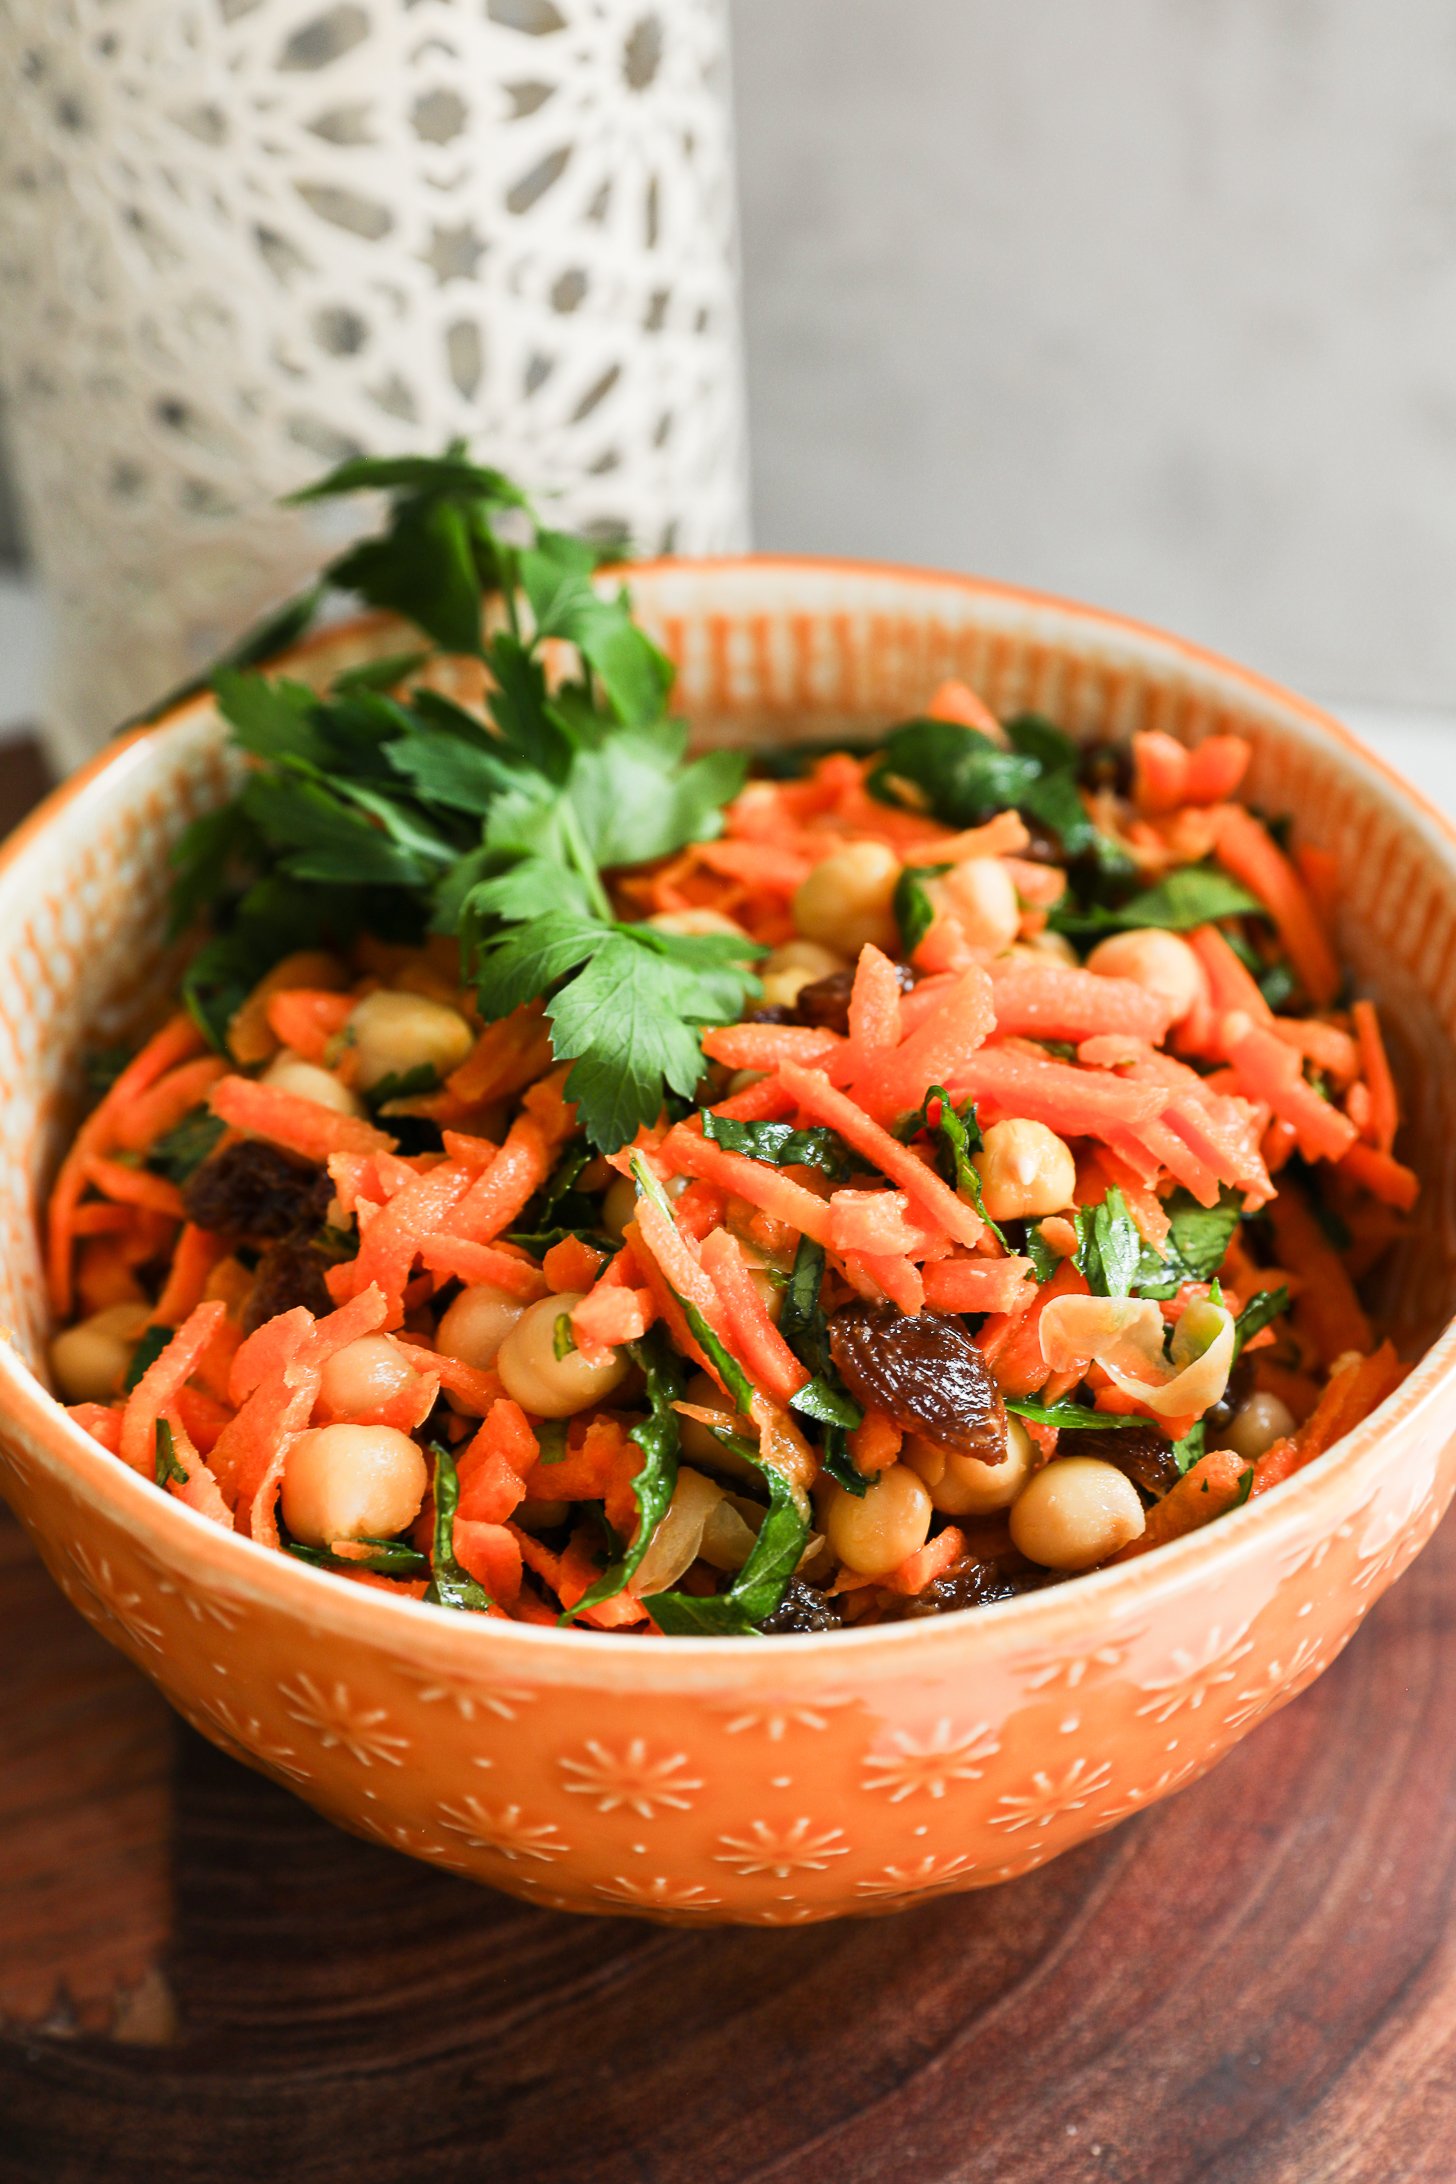 Angled close-up of a bowl of grated carrot salad with chickpeas, raisins, and herbs.